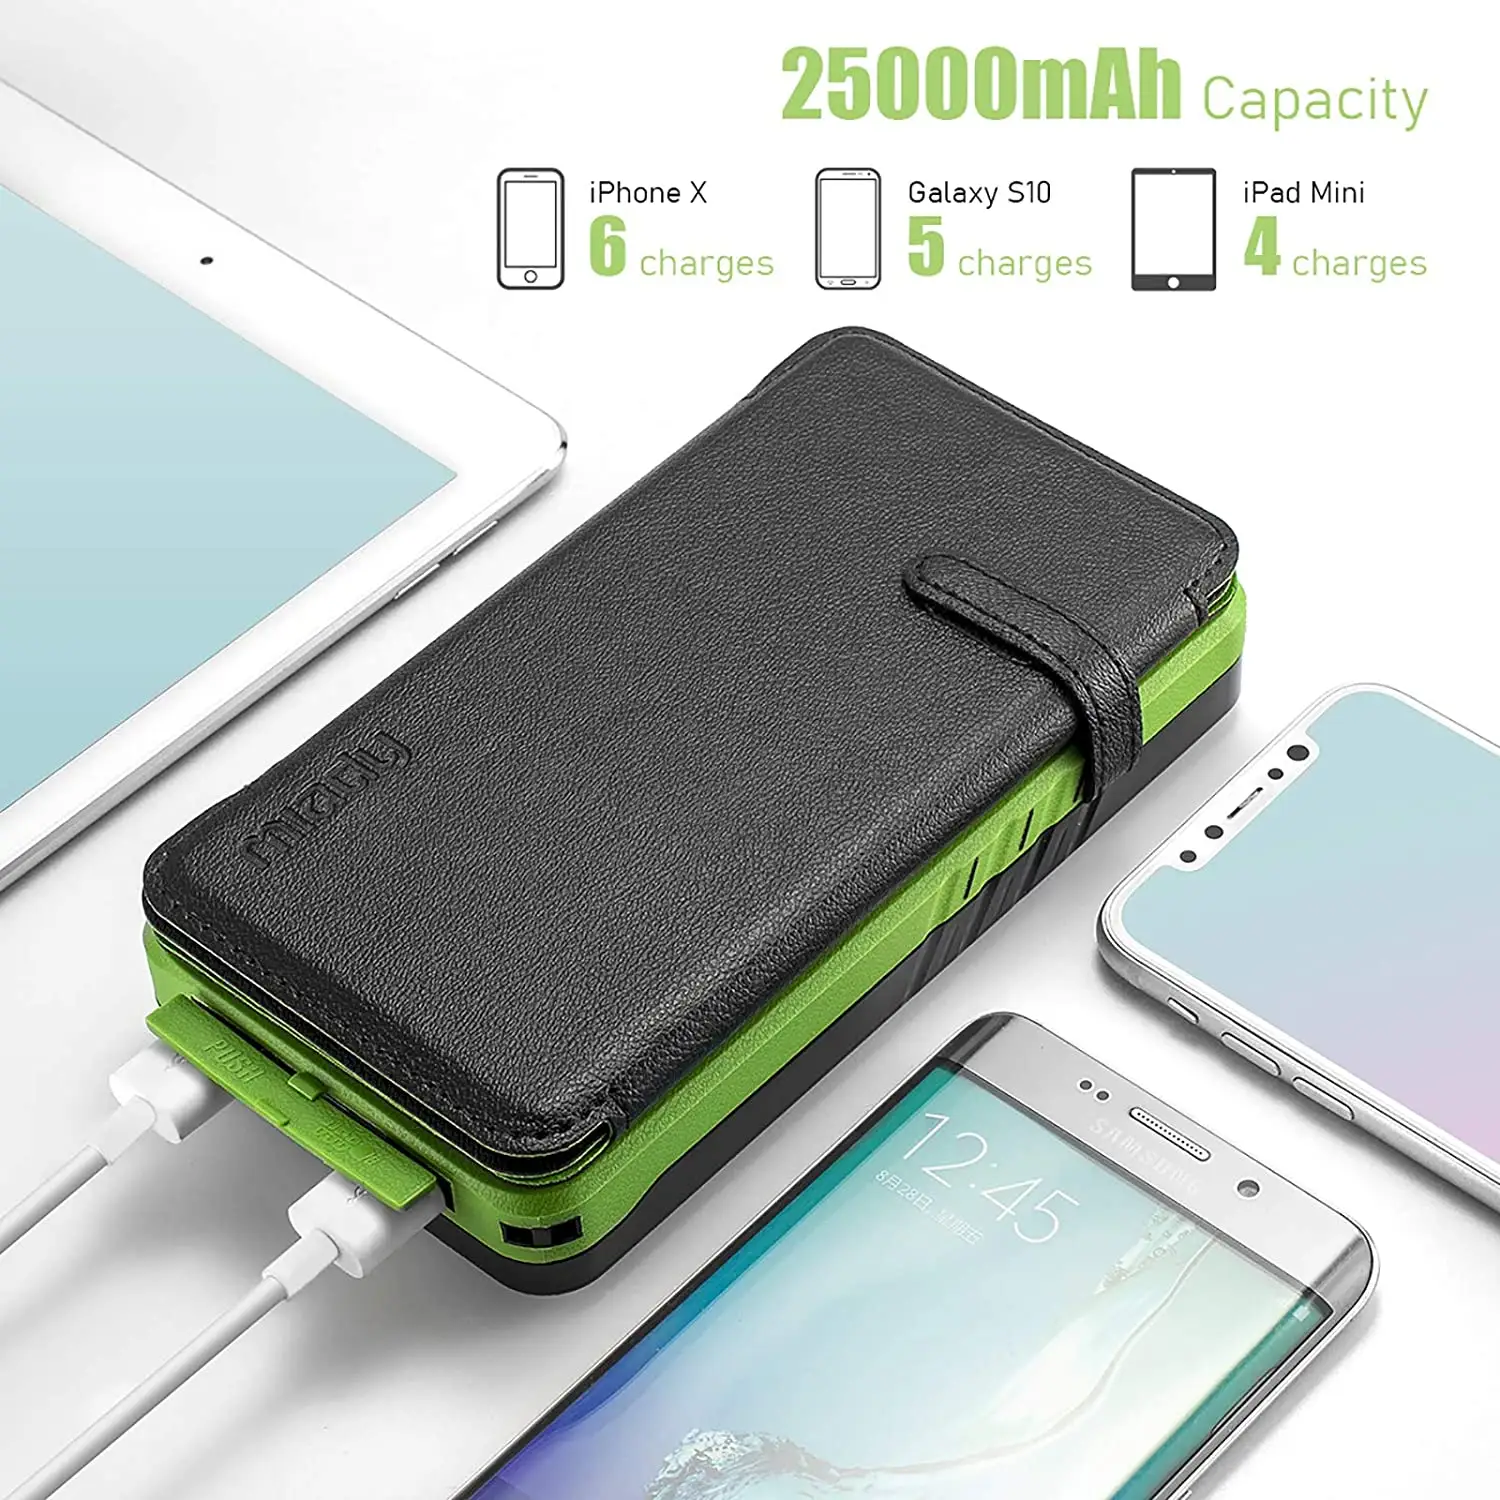 Solar Power Bank Camping Phone Charger 25000mAh Dual Output, External Battery Pack for iPhone, Samsung Galaxy, Android P